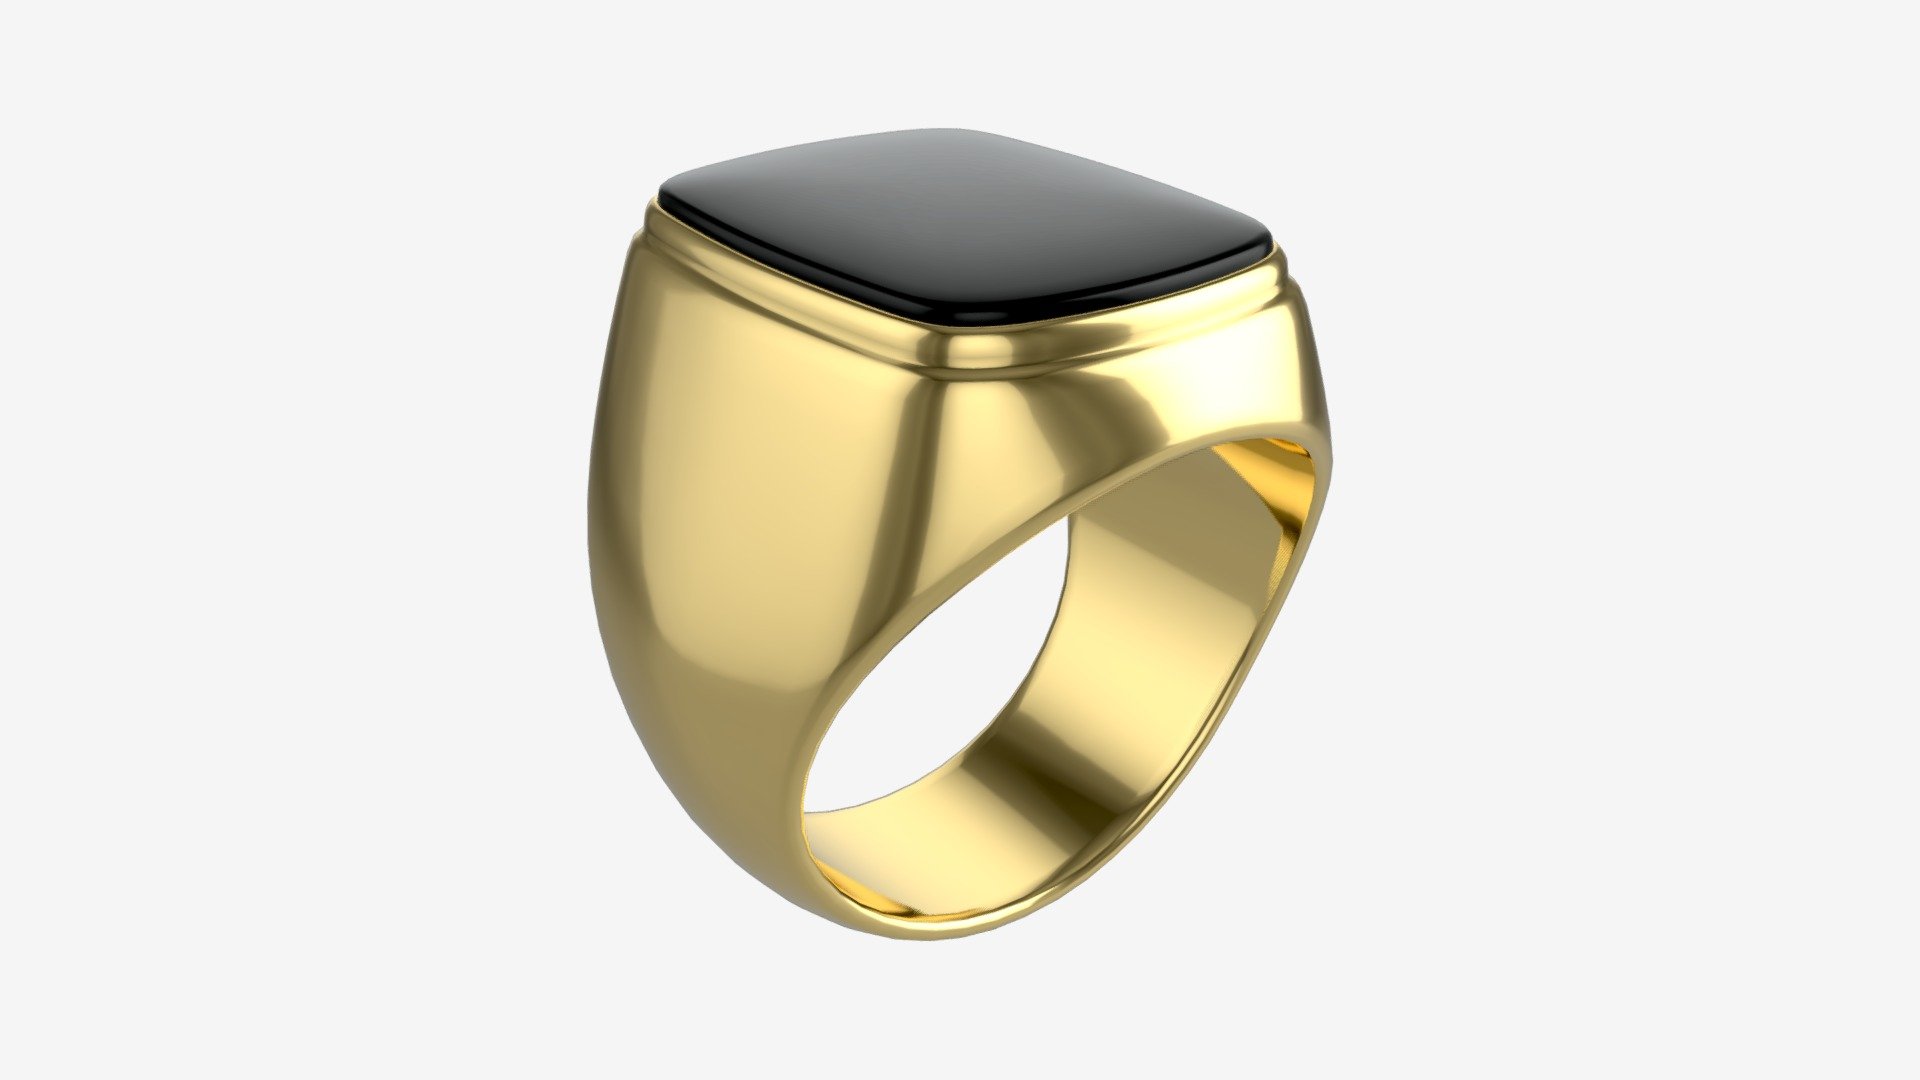 Gold Ring with Stone Jewelry 09 - Buy Royalty Free 3D model by HQ3DMOD (@AivisAstics) 3d model